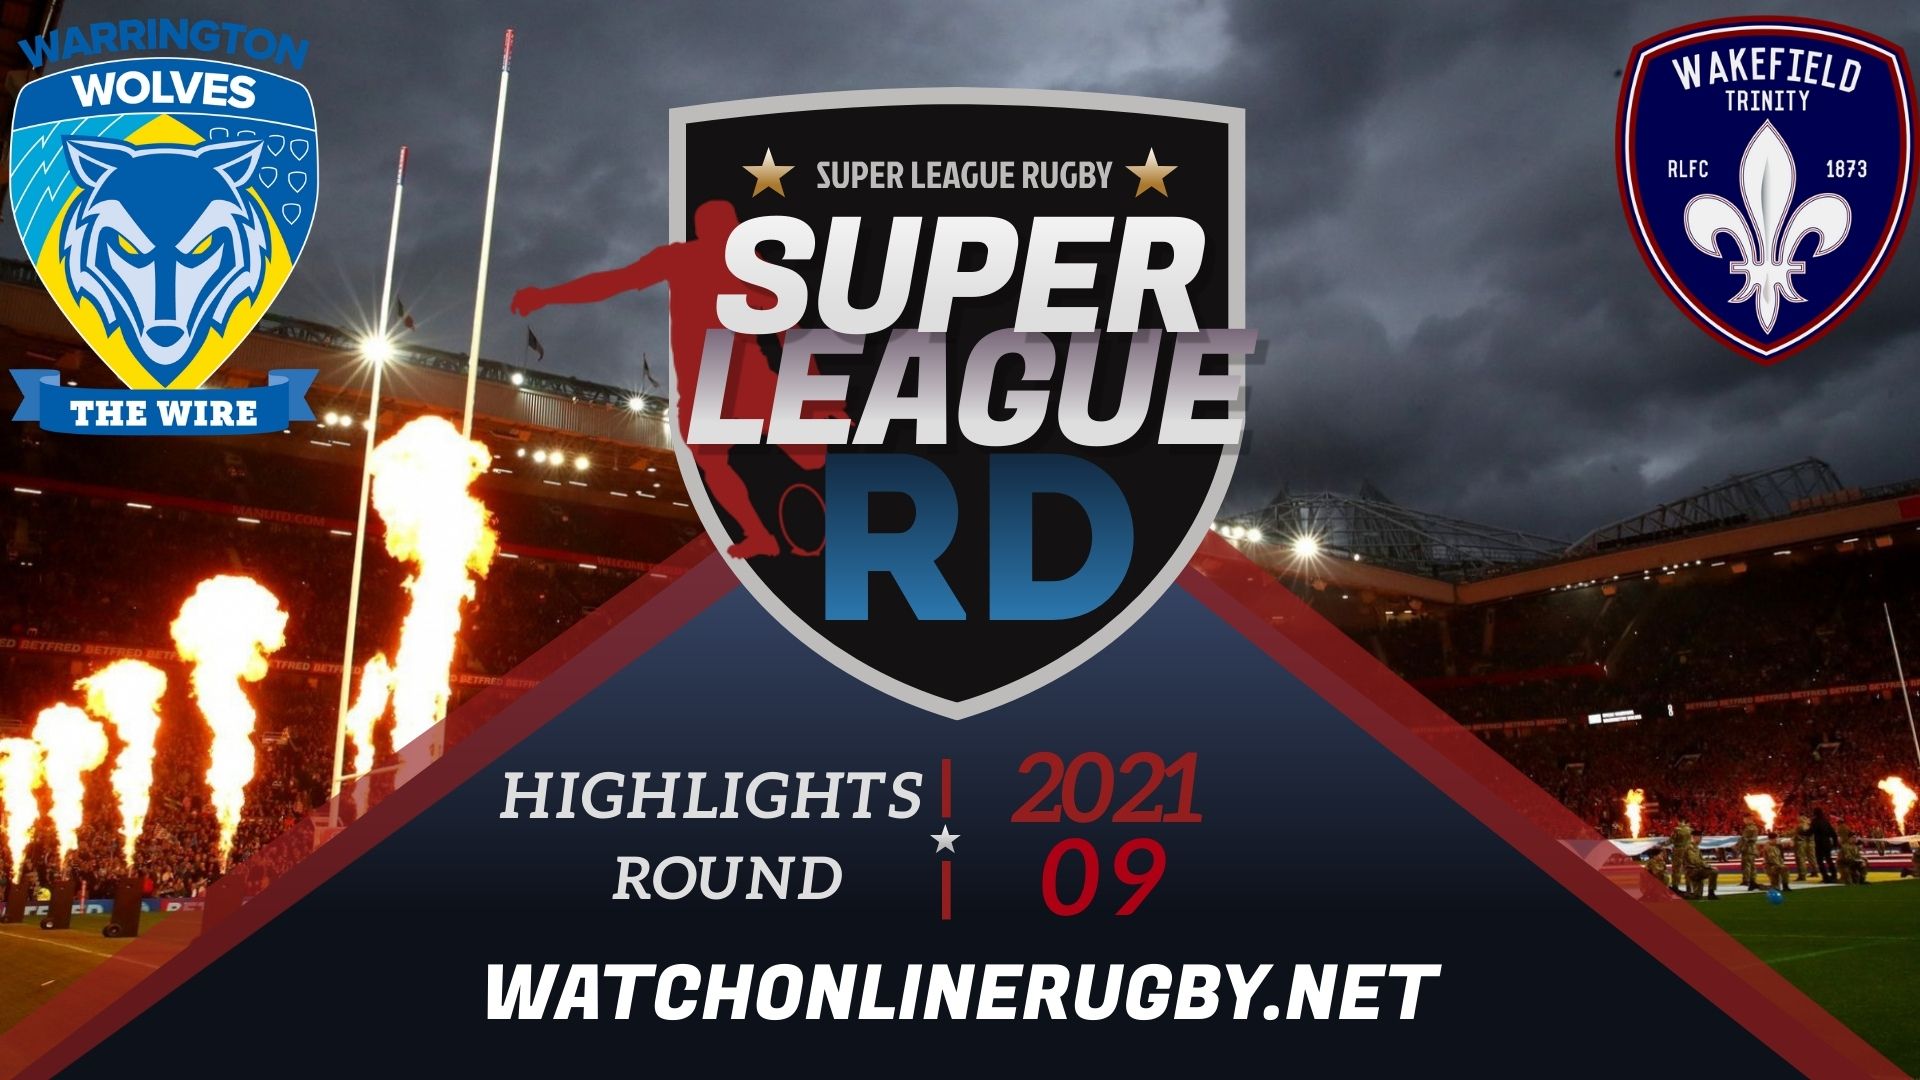 Warrington Wolves Vs Wakefield Trinity Super League Rugby 2021 RD 9